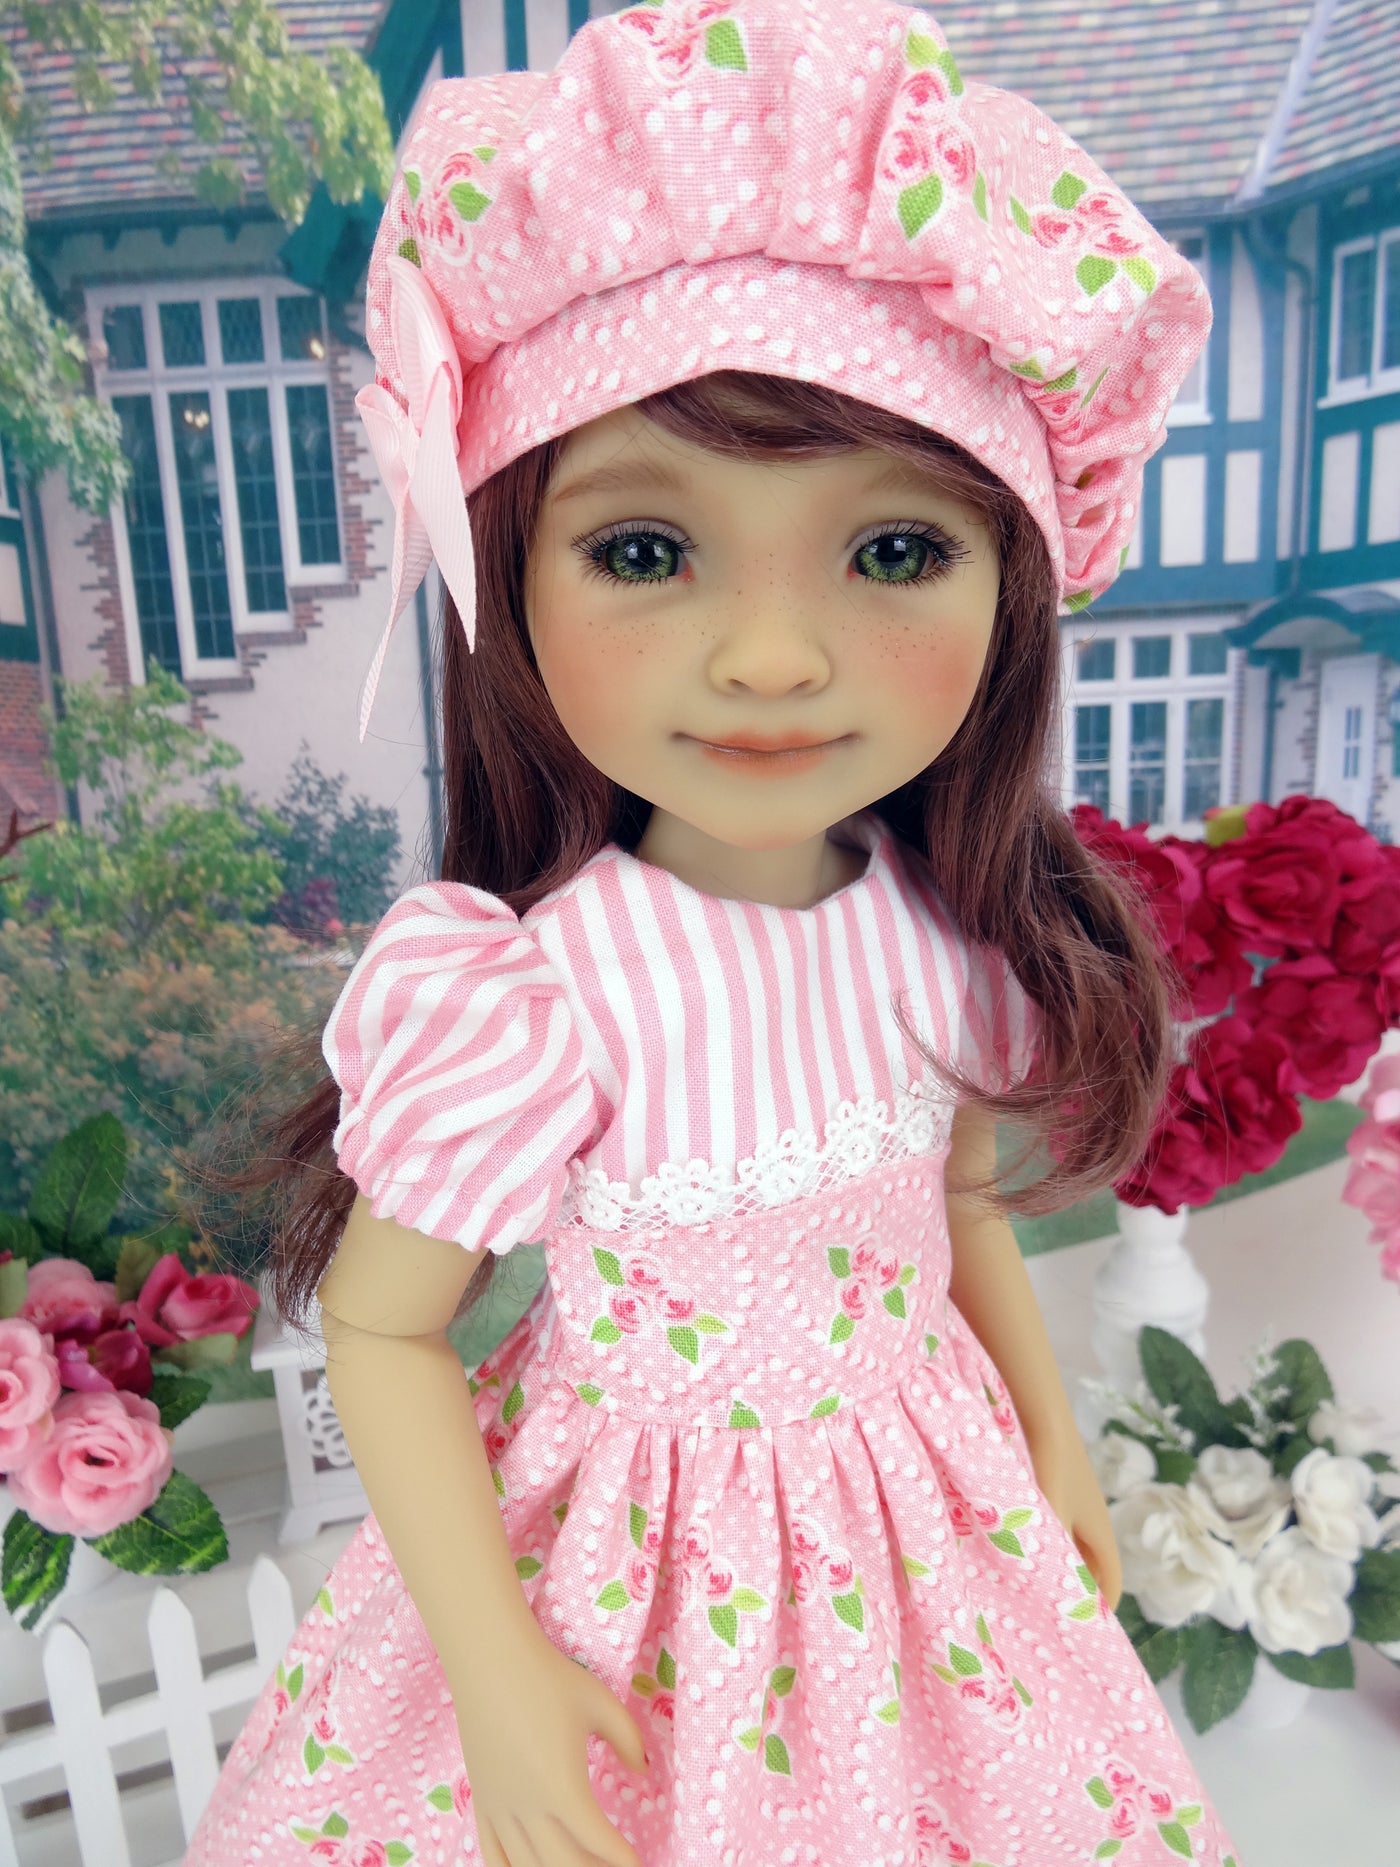 Delicate Hearts - dress and shoes for Ruby Red Fashion Friends doll